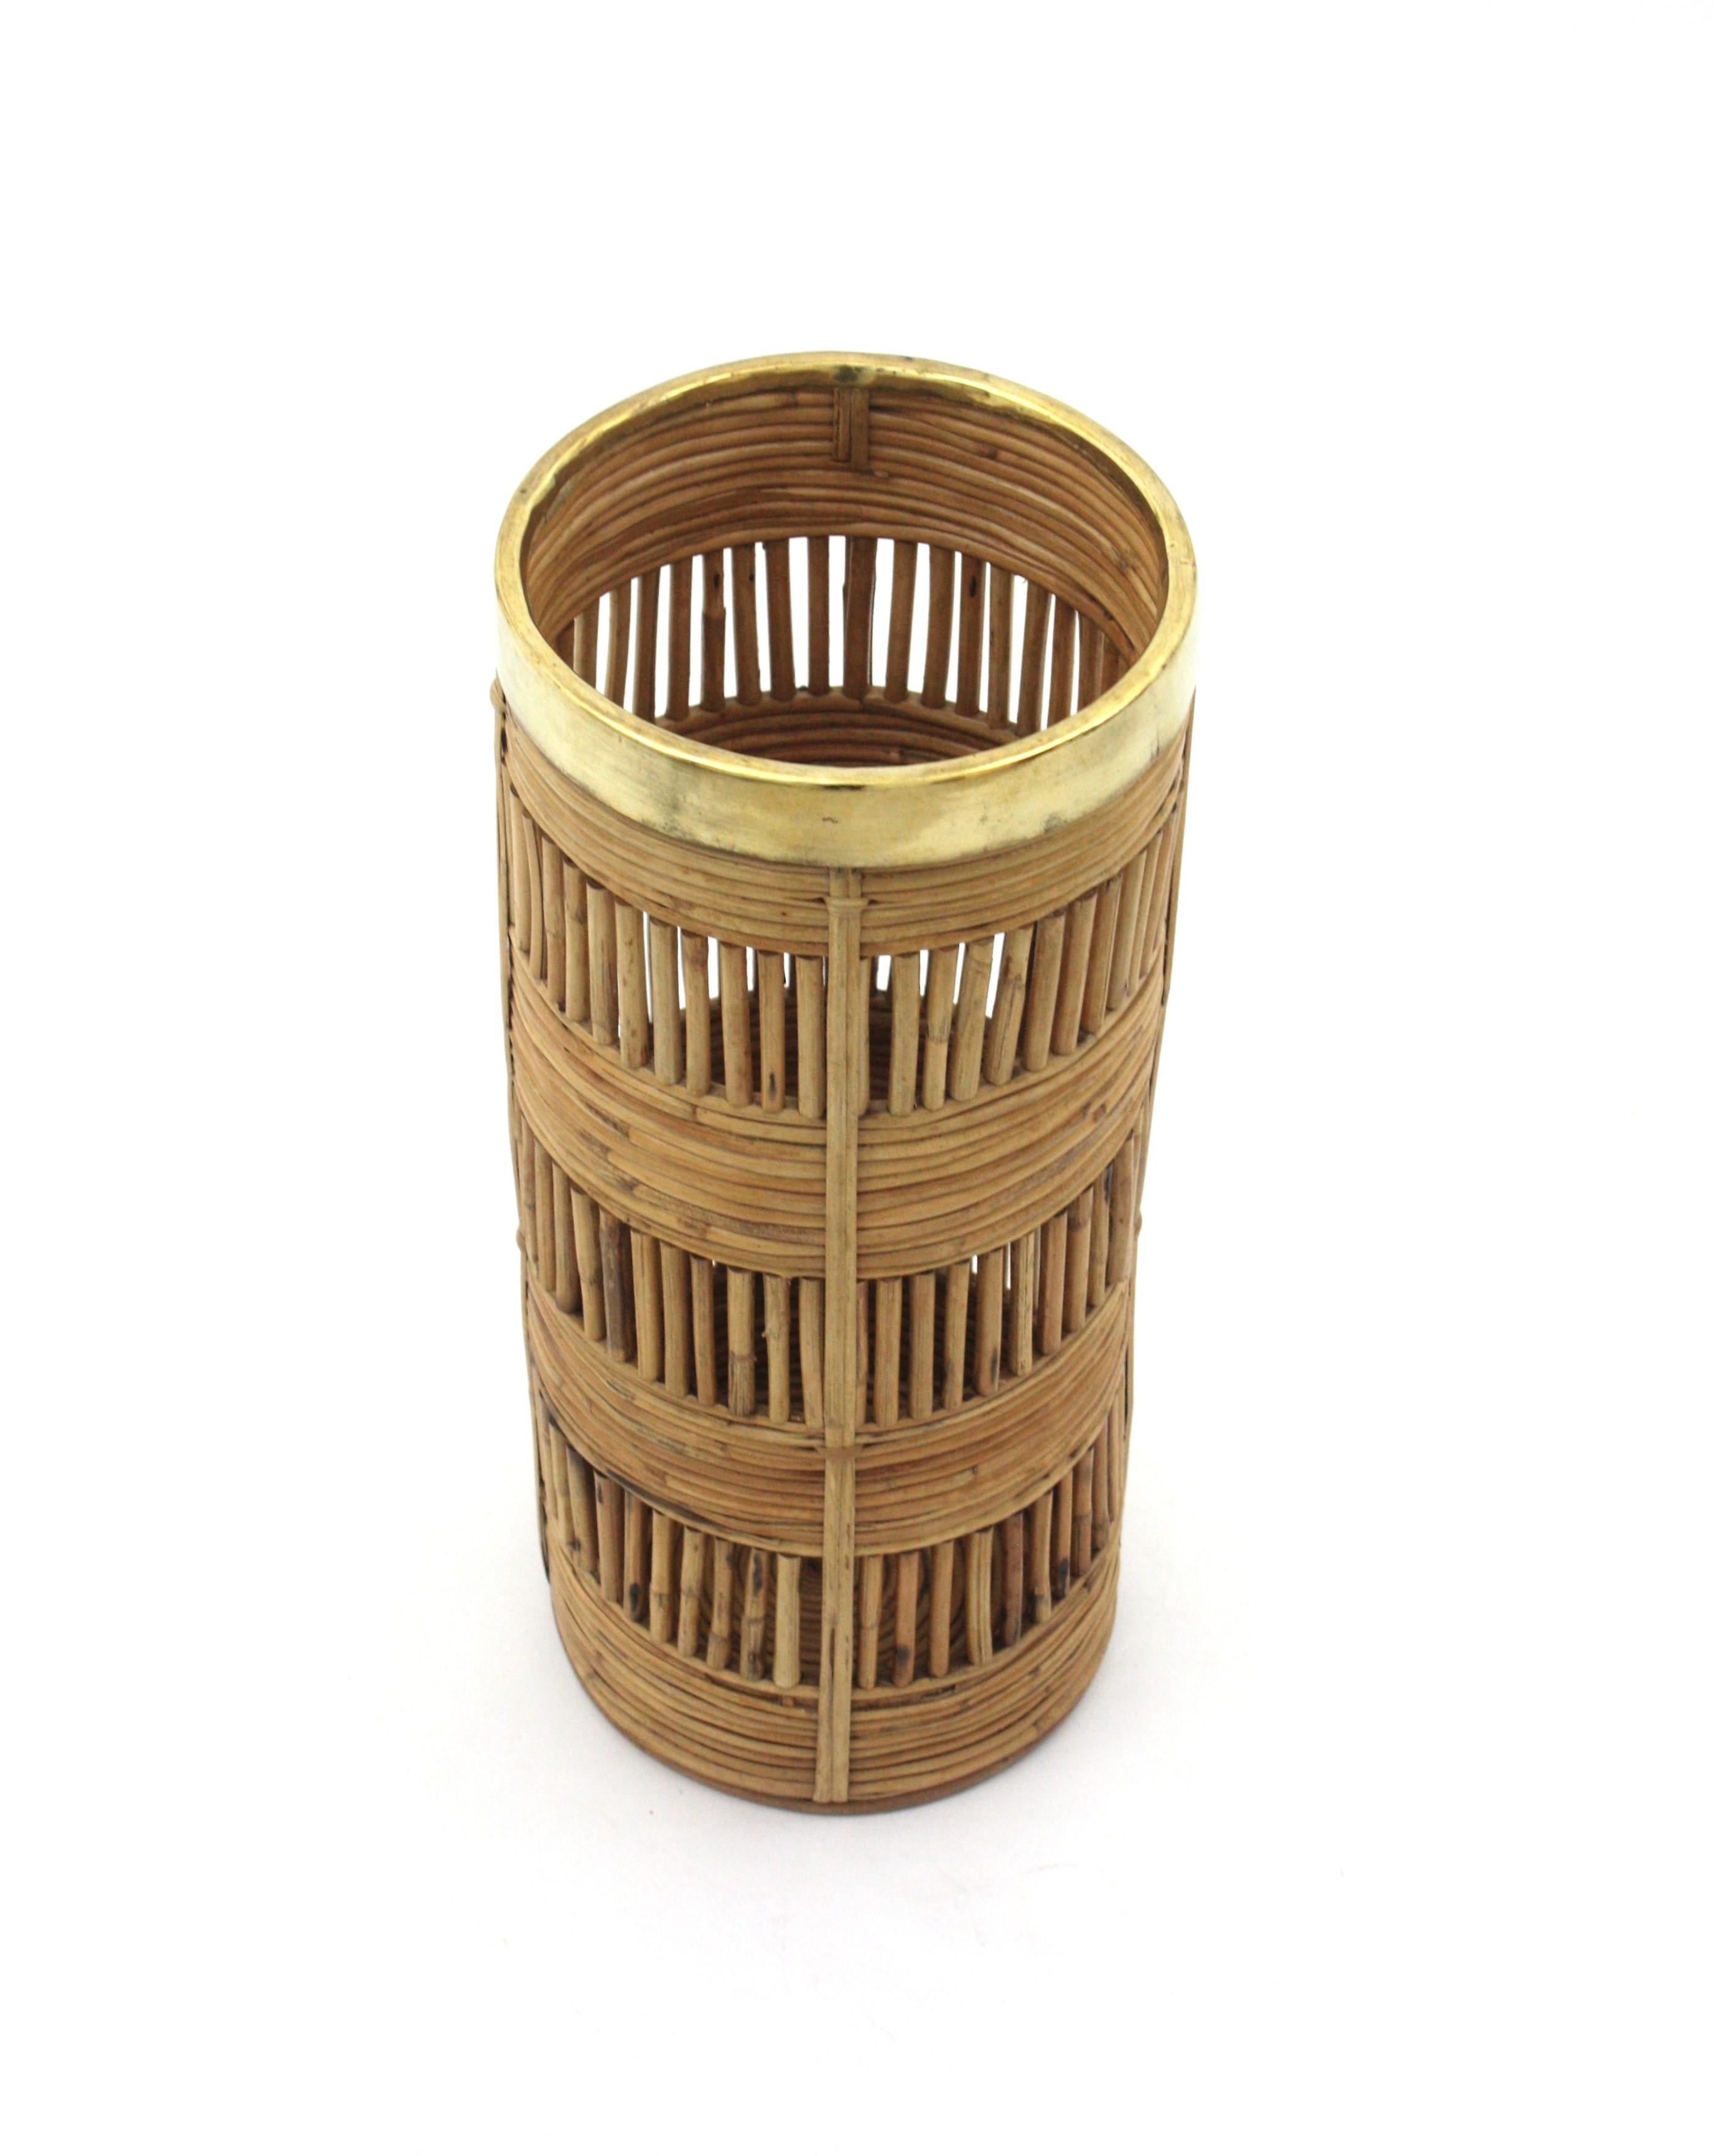 Rattan Umbrella Stand with Brass Rim, Italy, 1970s For Sale 4